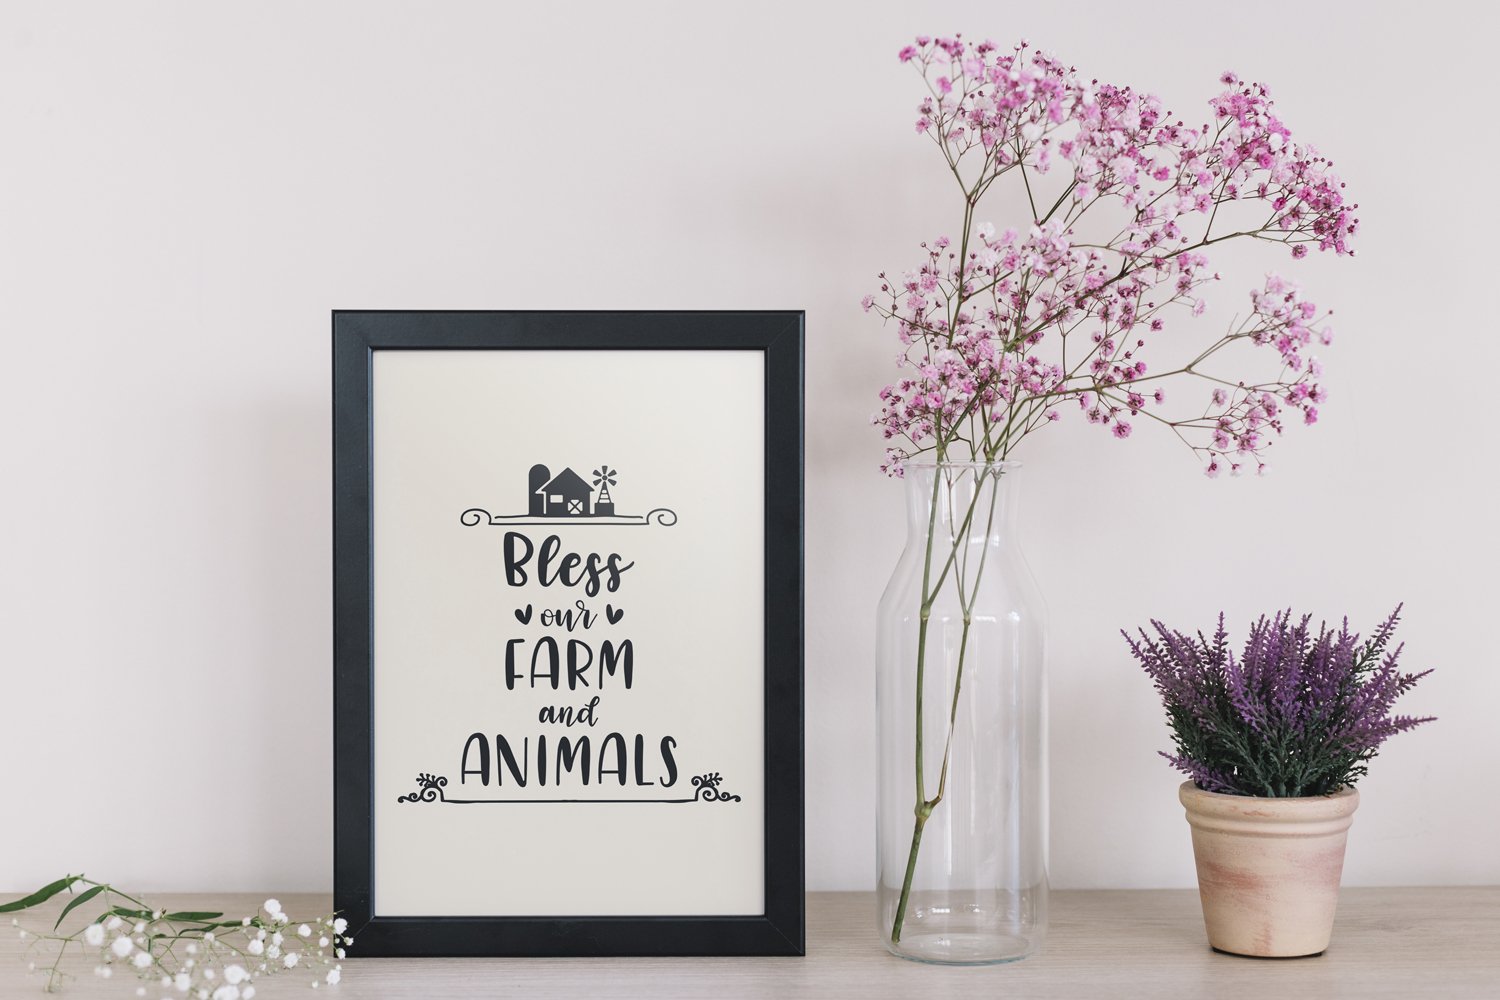 Picture of a vase with flowers and a picture of a farm and animals.